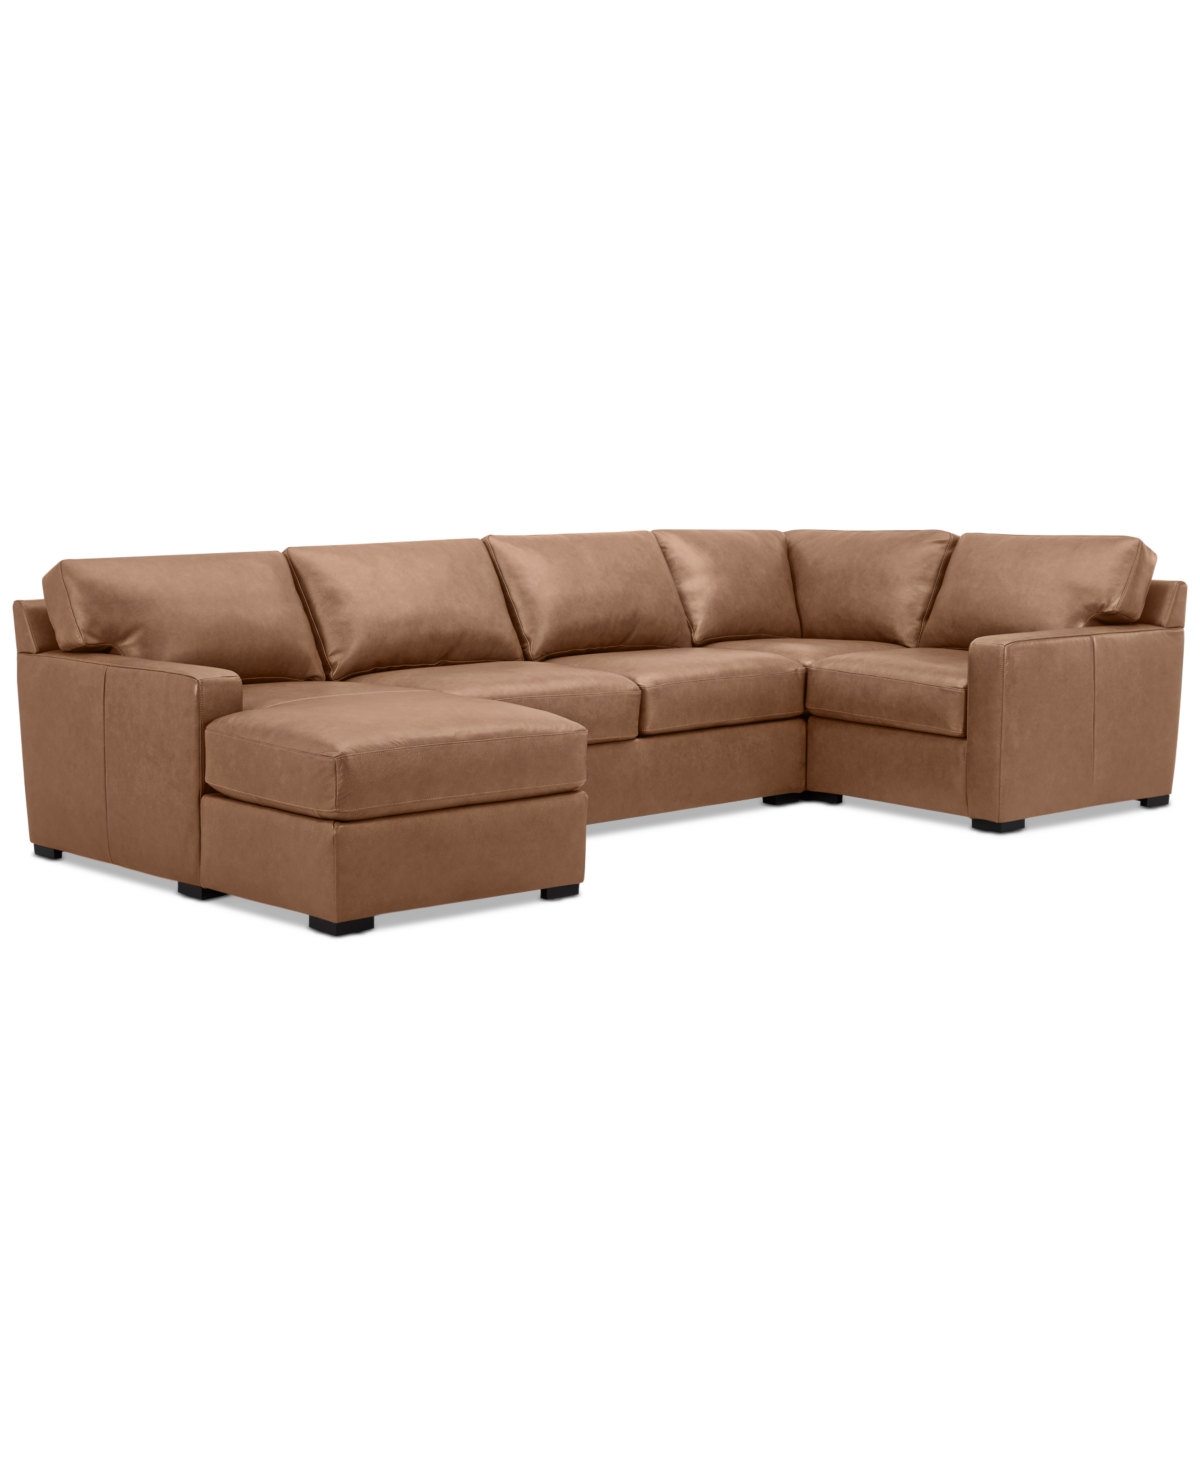 Macy's Radley 136" 4-pc. Leather Square Corner Modular Chaise Sectional, Created For  In Brown